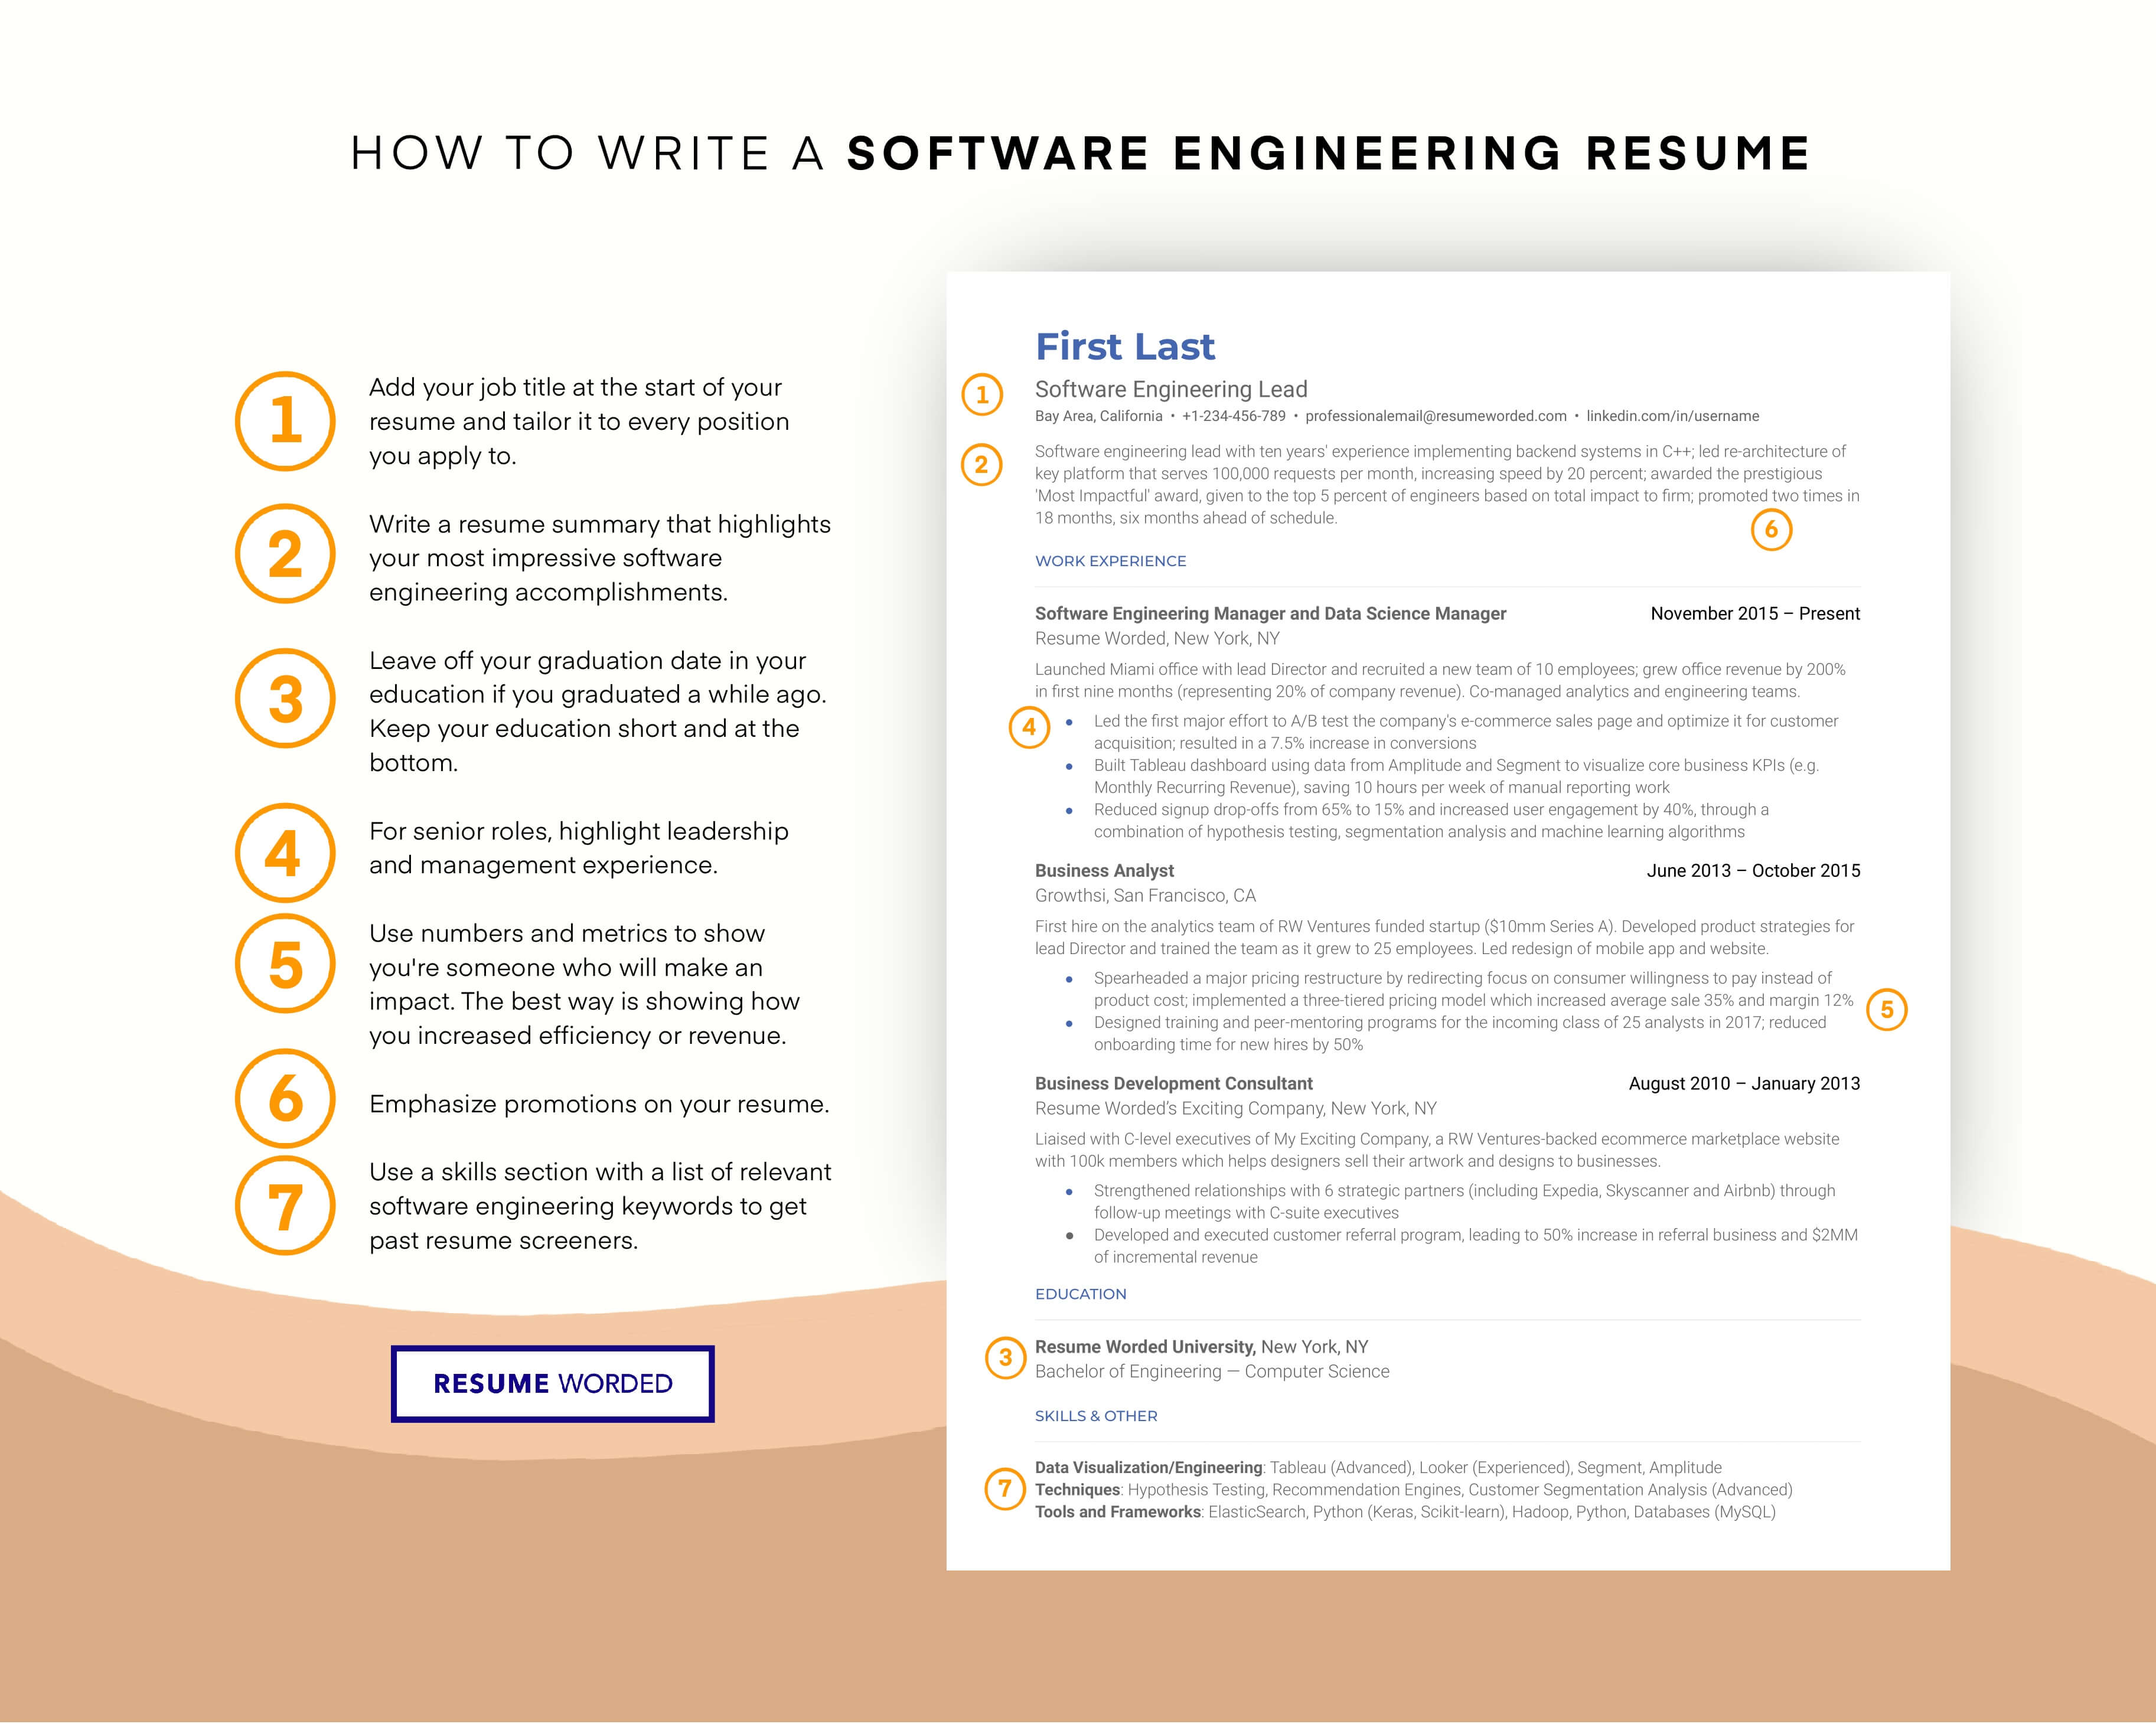 Showcase Software Proficiency - Entry Level Electrical Engineer CV